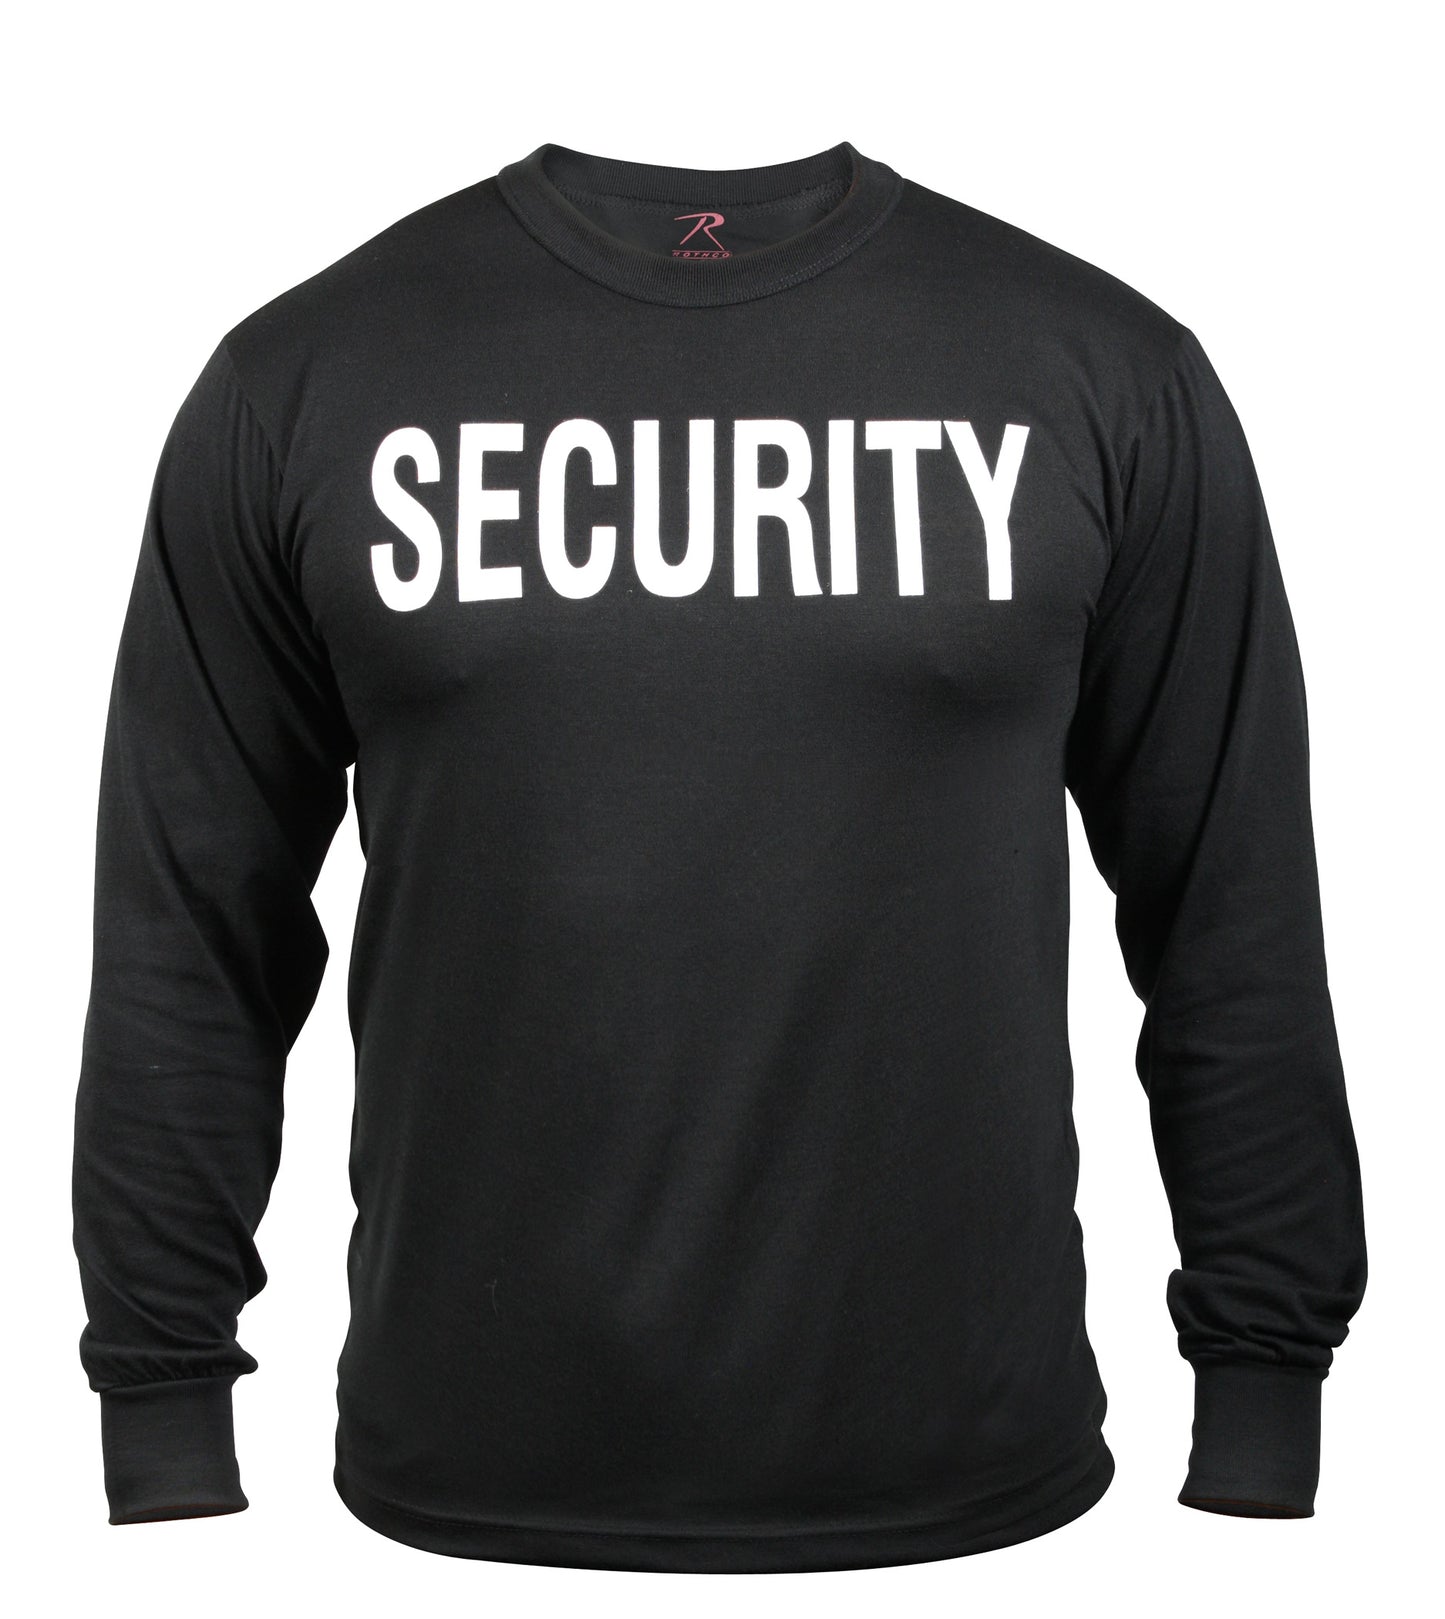 Milspec 2-Sided Security Long Sleeve T-Shirt T-Shirts MilTac Tactical Military Outdoor Gear Australia